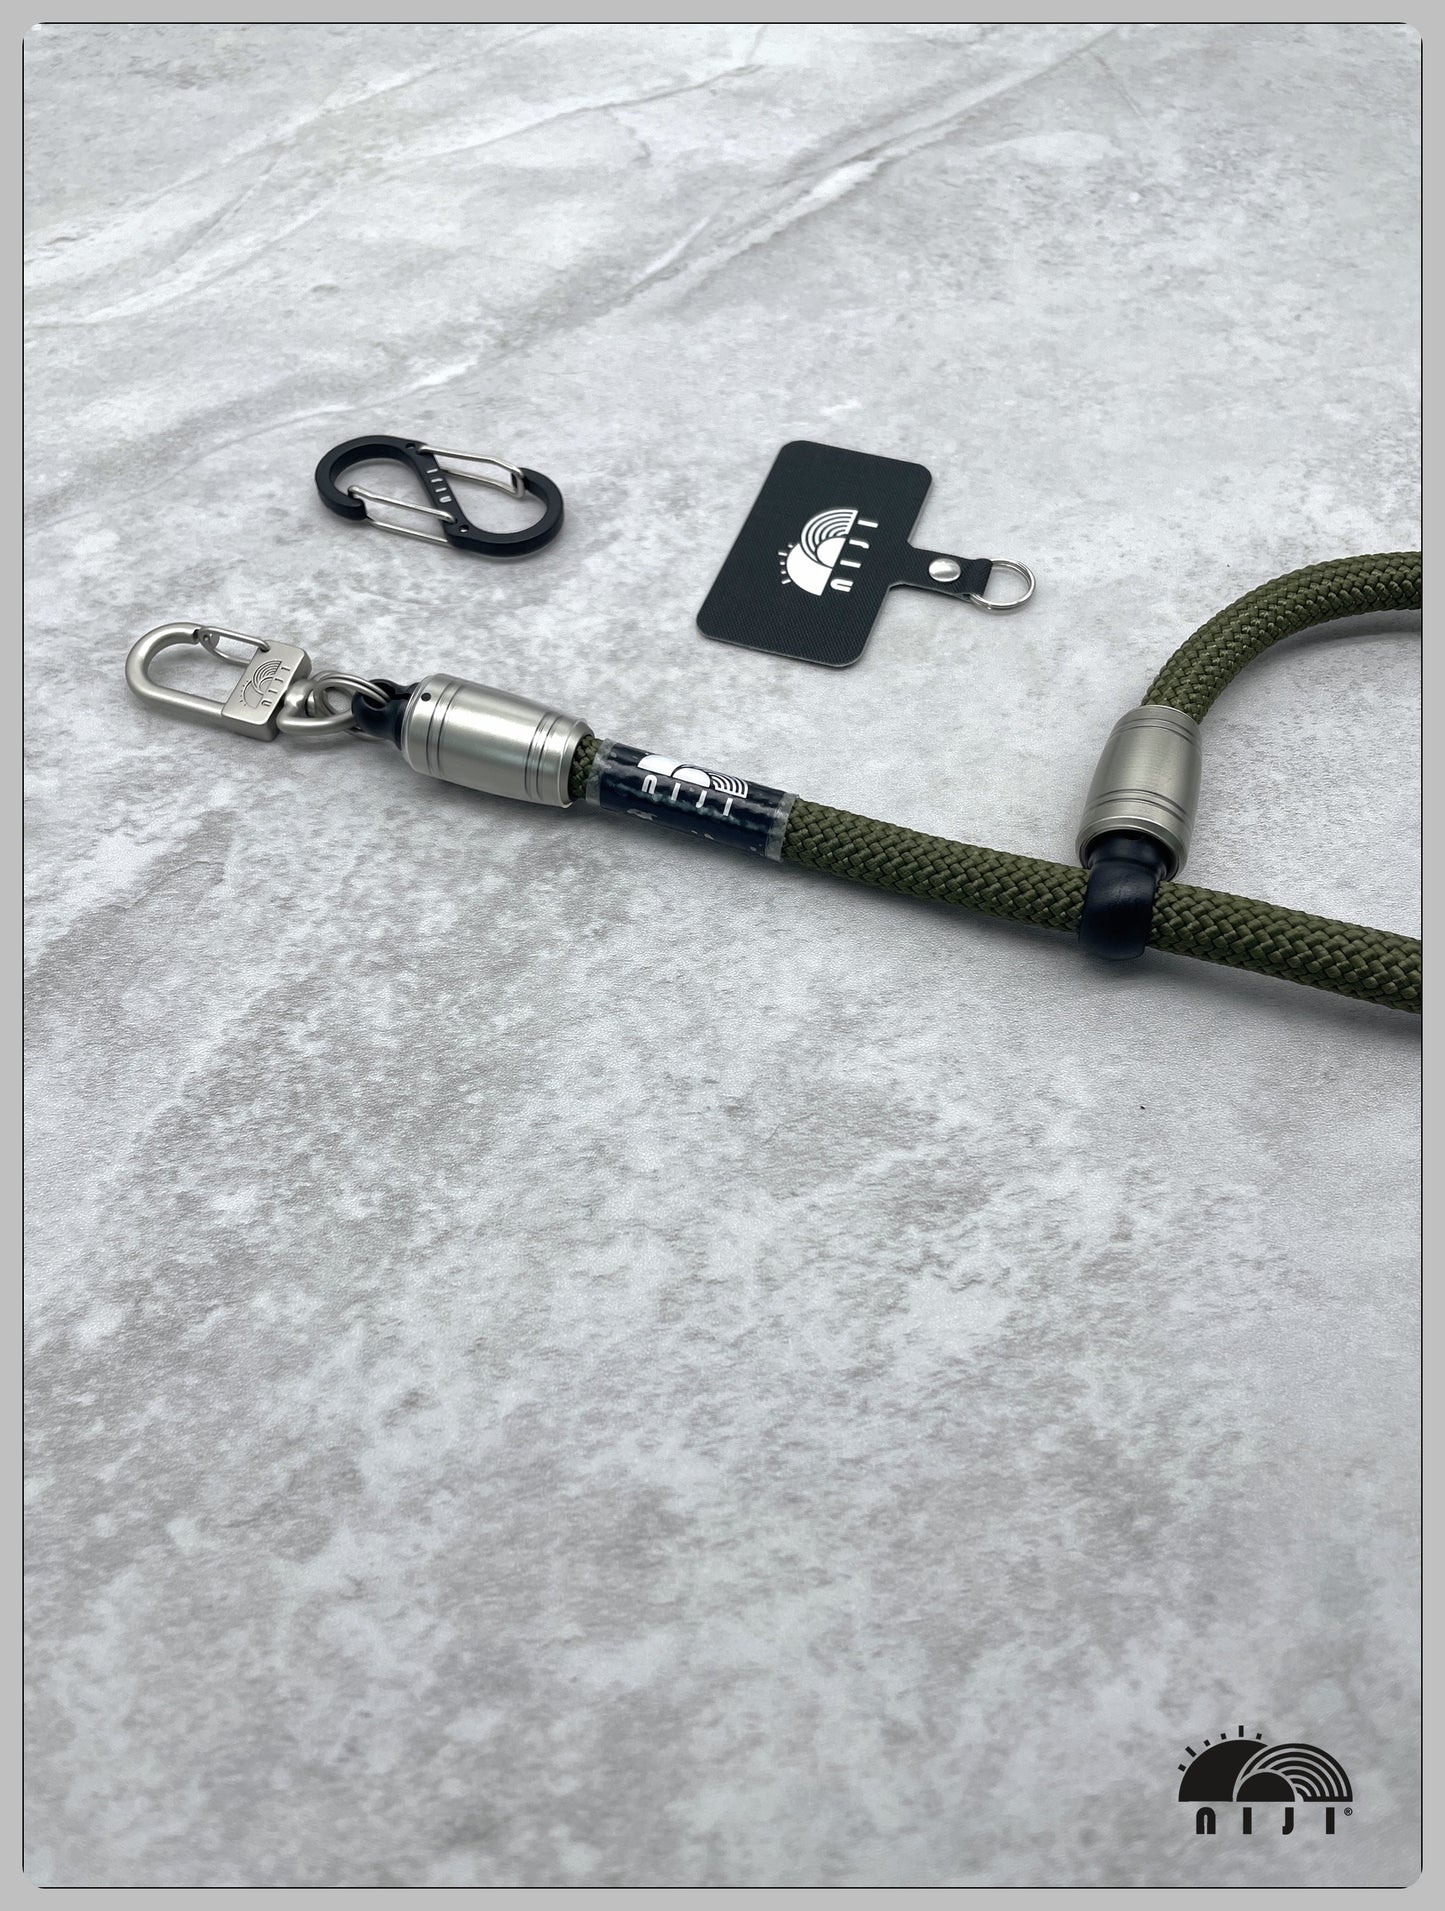 "NEW COLLECTION" 10mm camera / mobile wrist strap Olive color